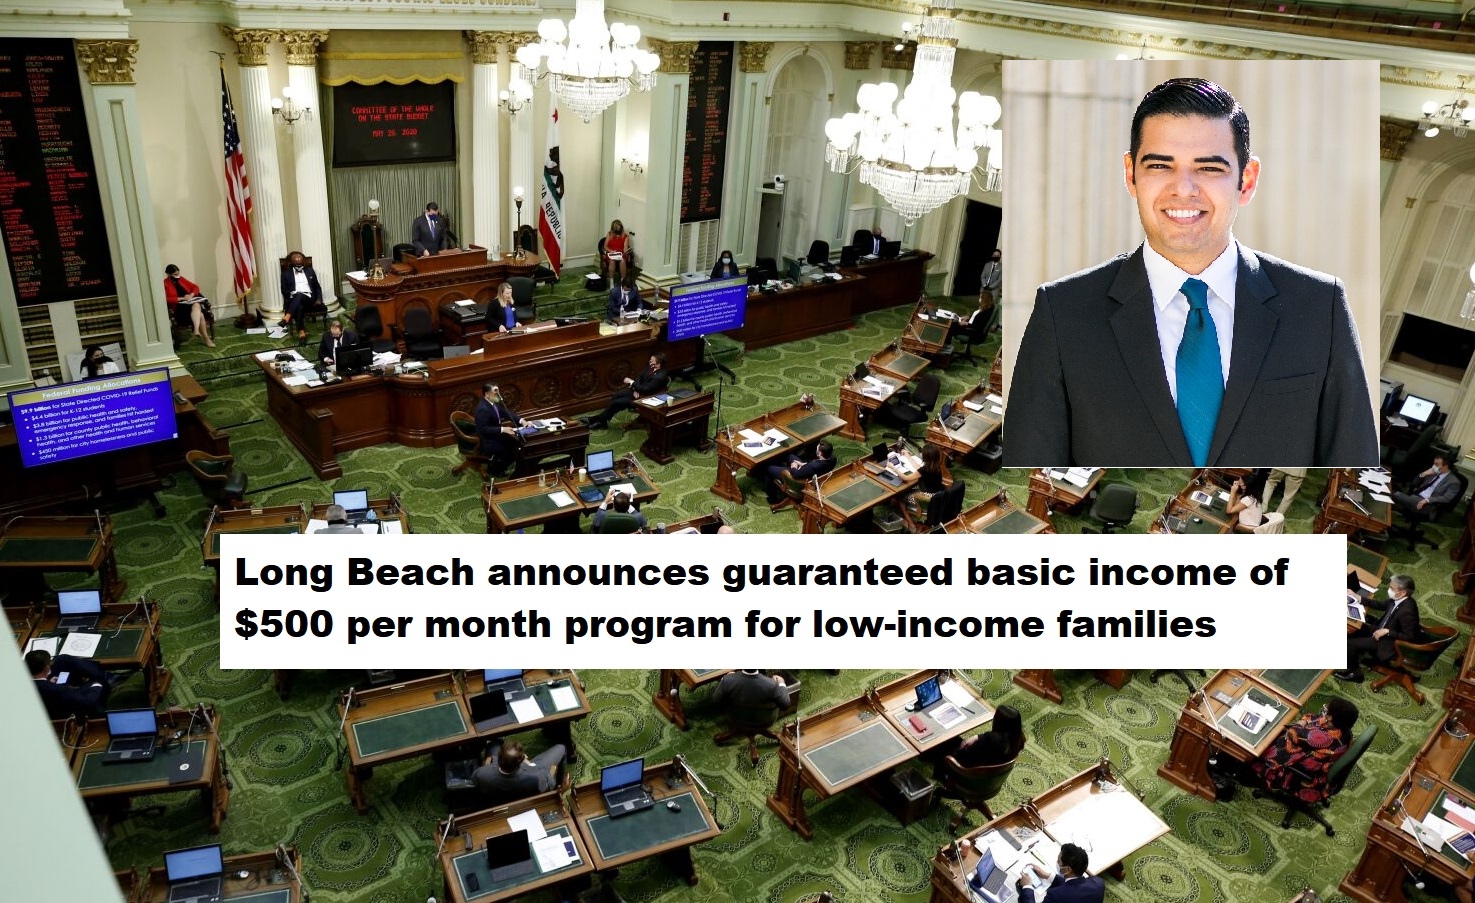 Long Beach announces guaranteed basic income program for low income families